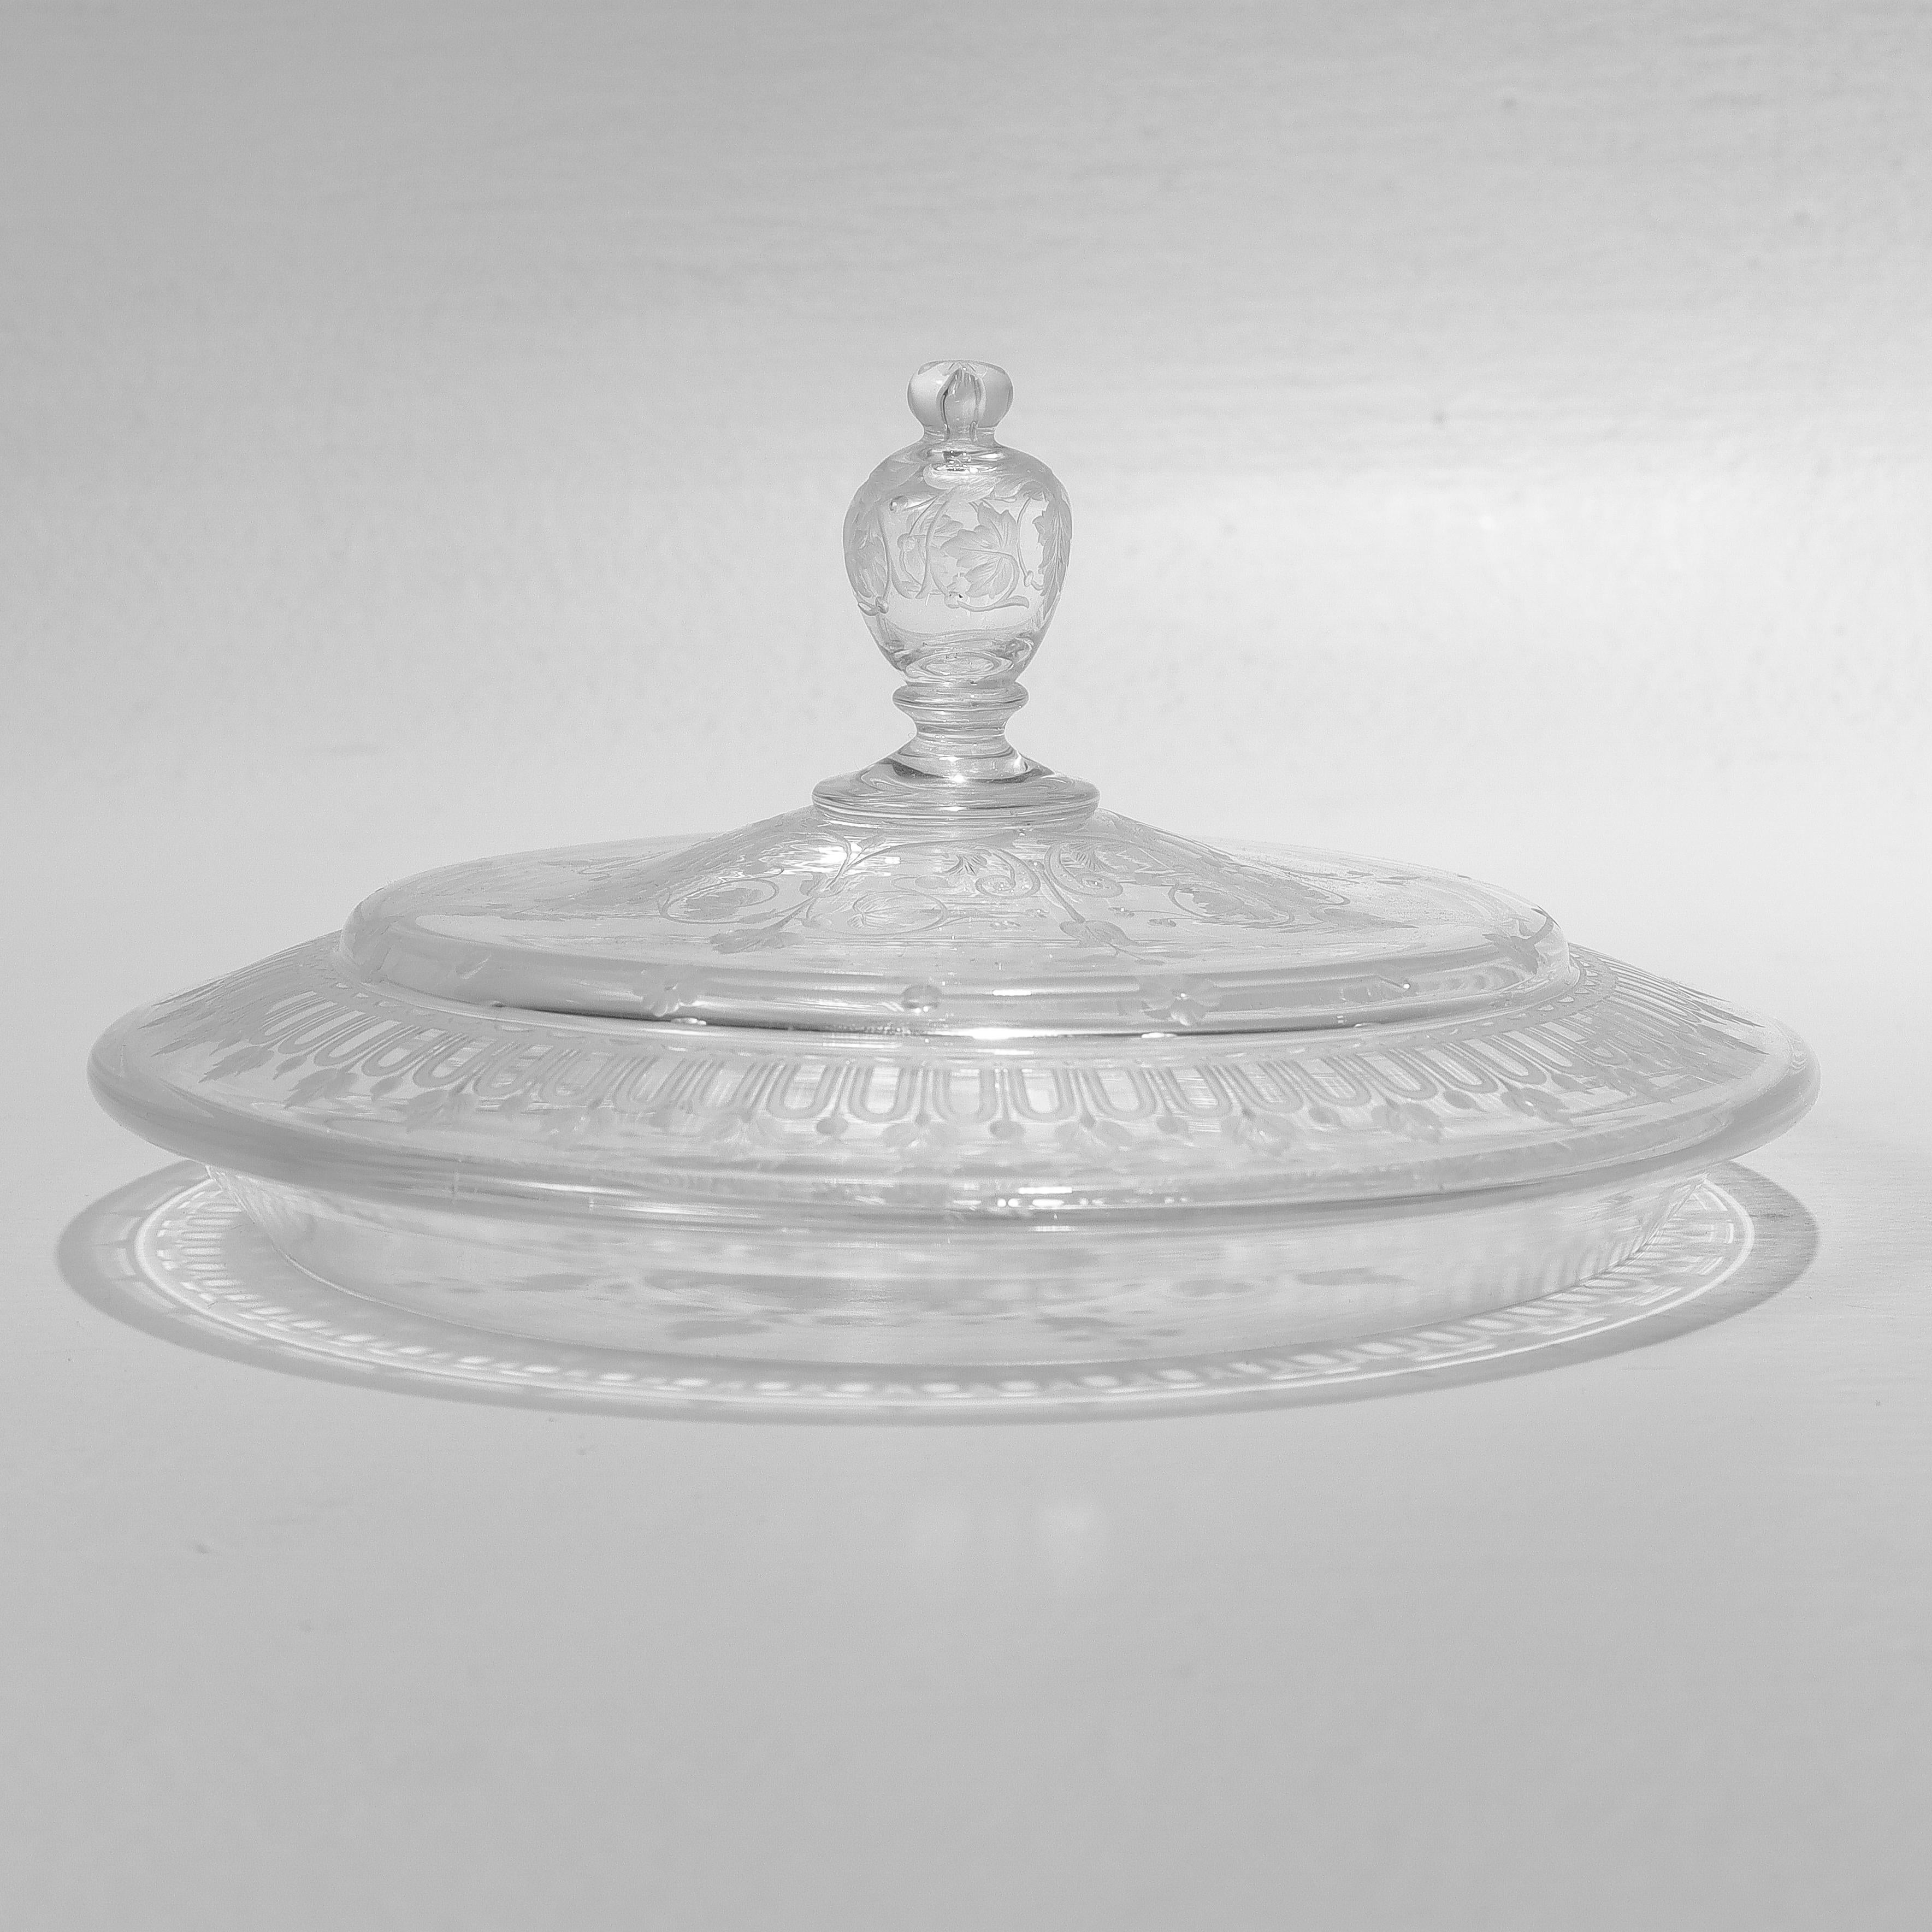 Antique Stourbridge Etched & Engraved Glass Lidded Compote 1 For Sale 2